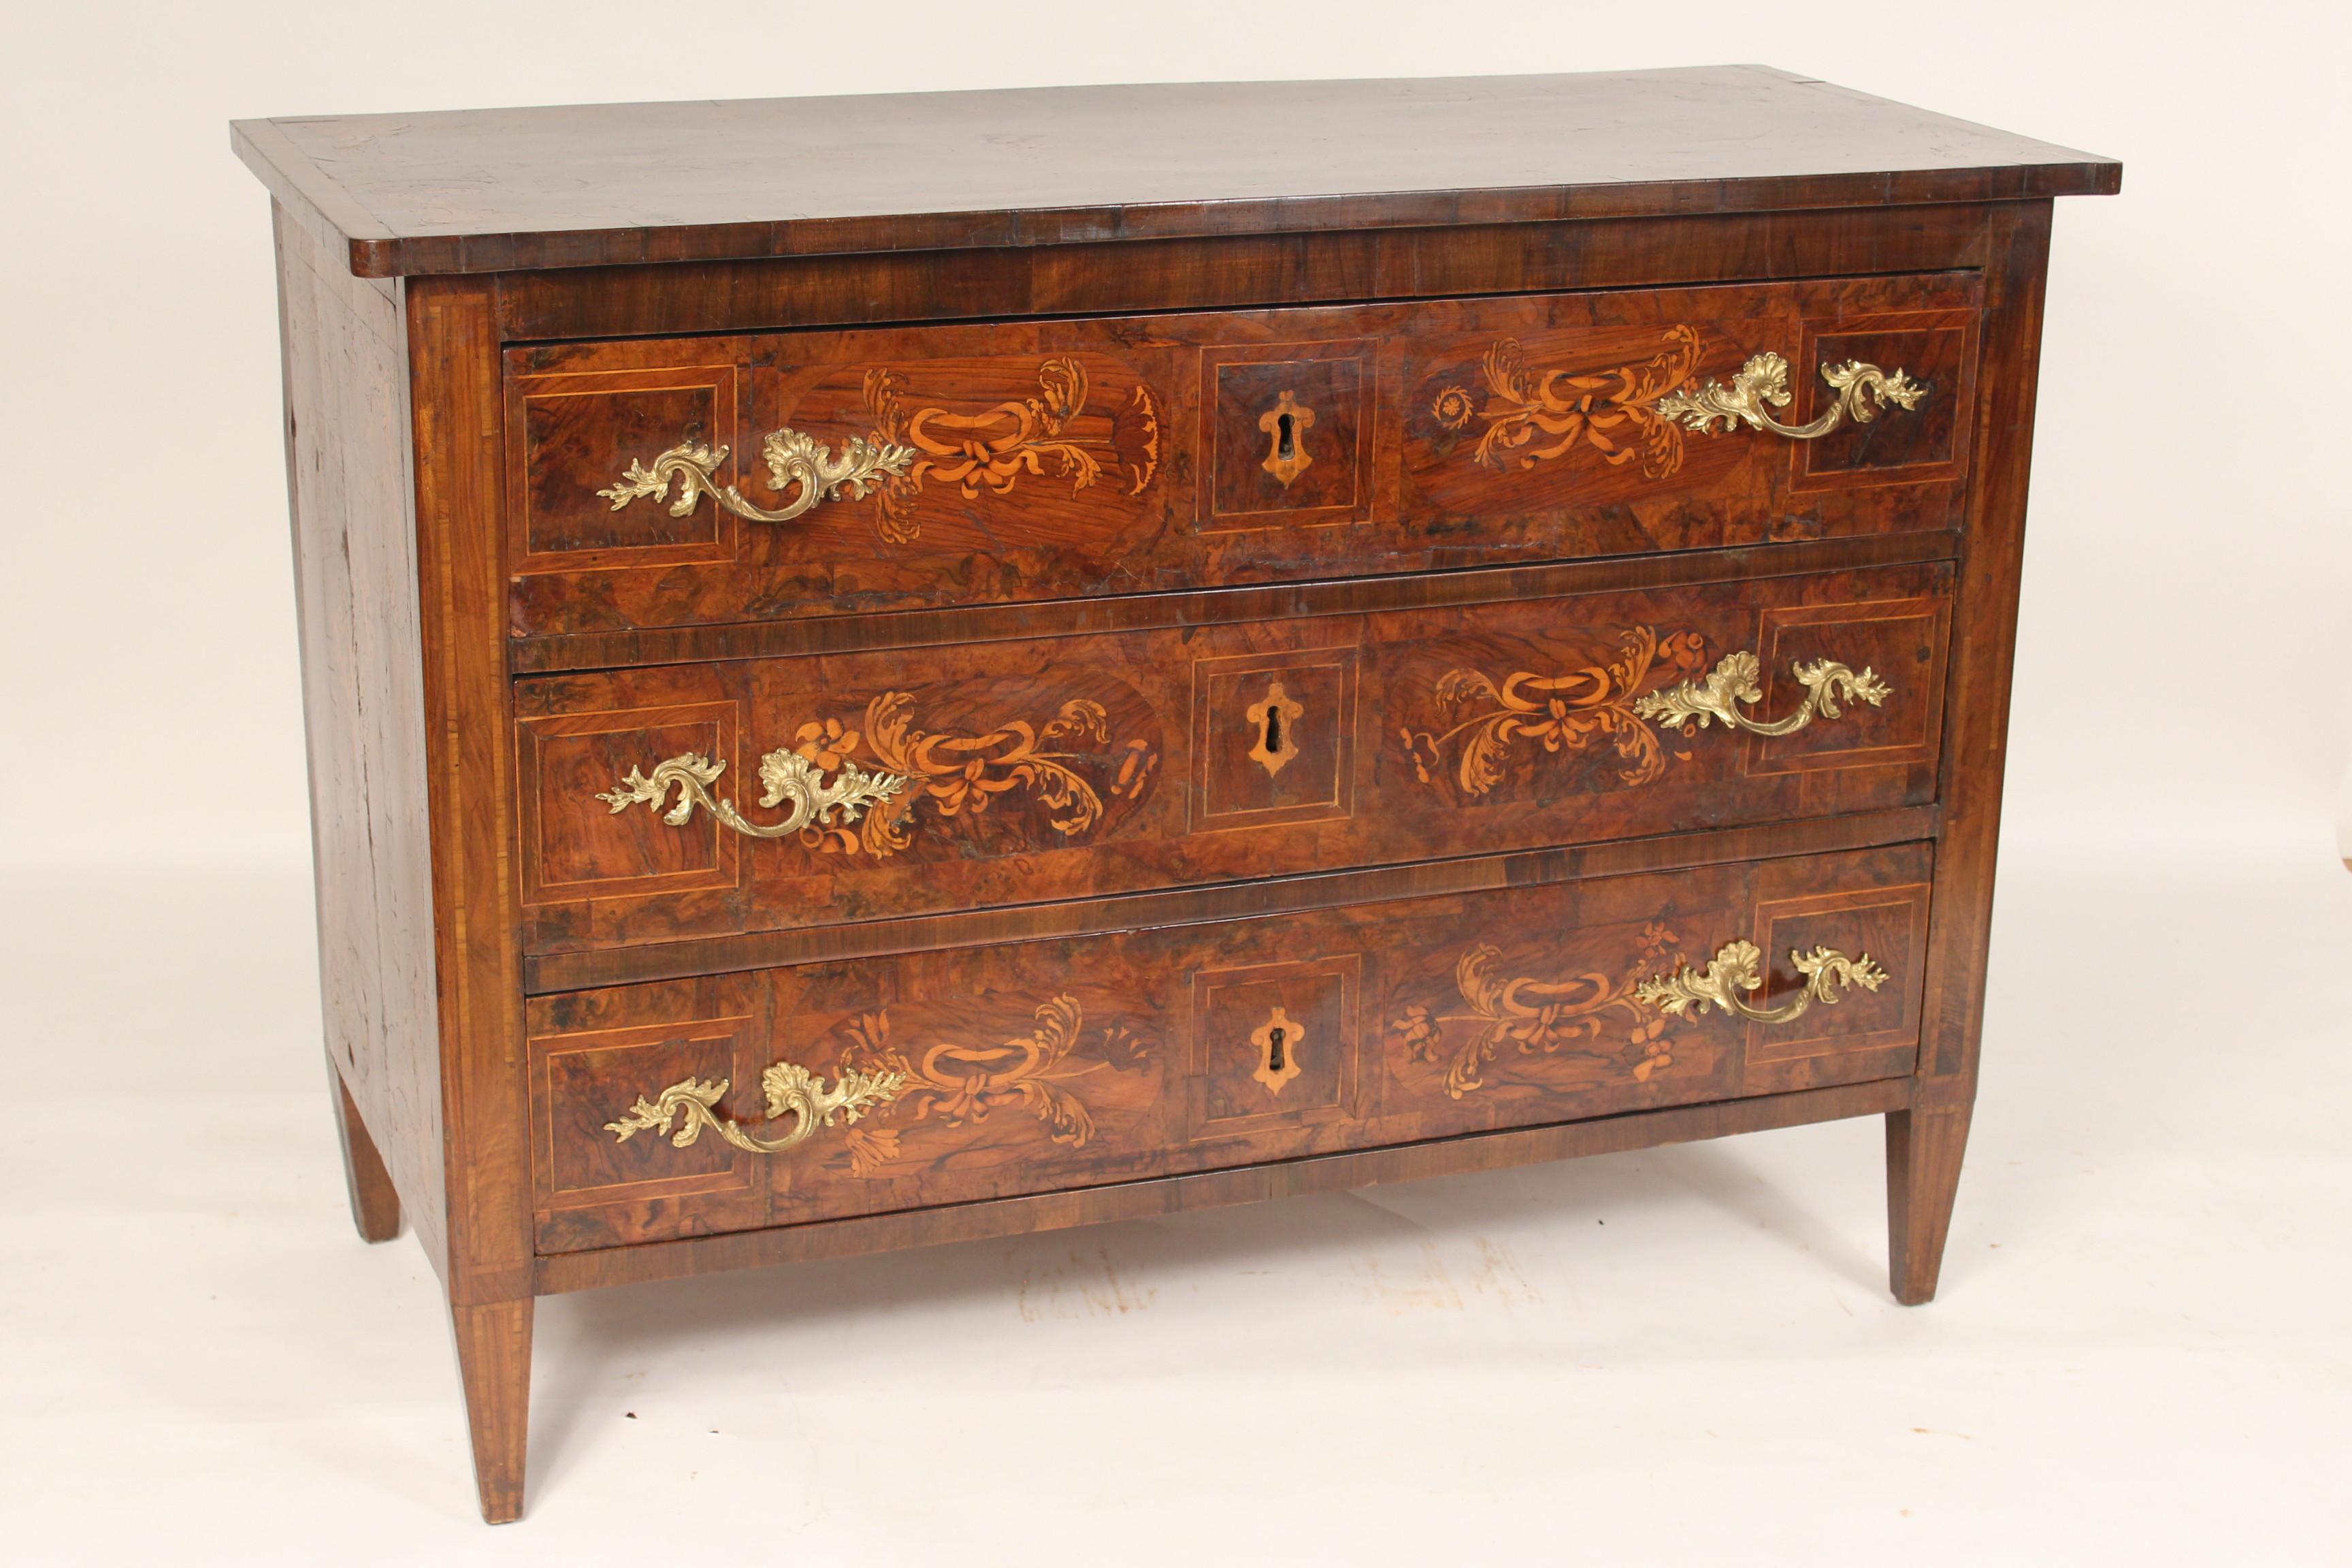 European Antique Louis XVI Style Inlaid Chest of Drawers For Sale